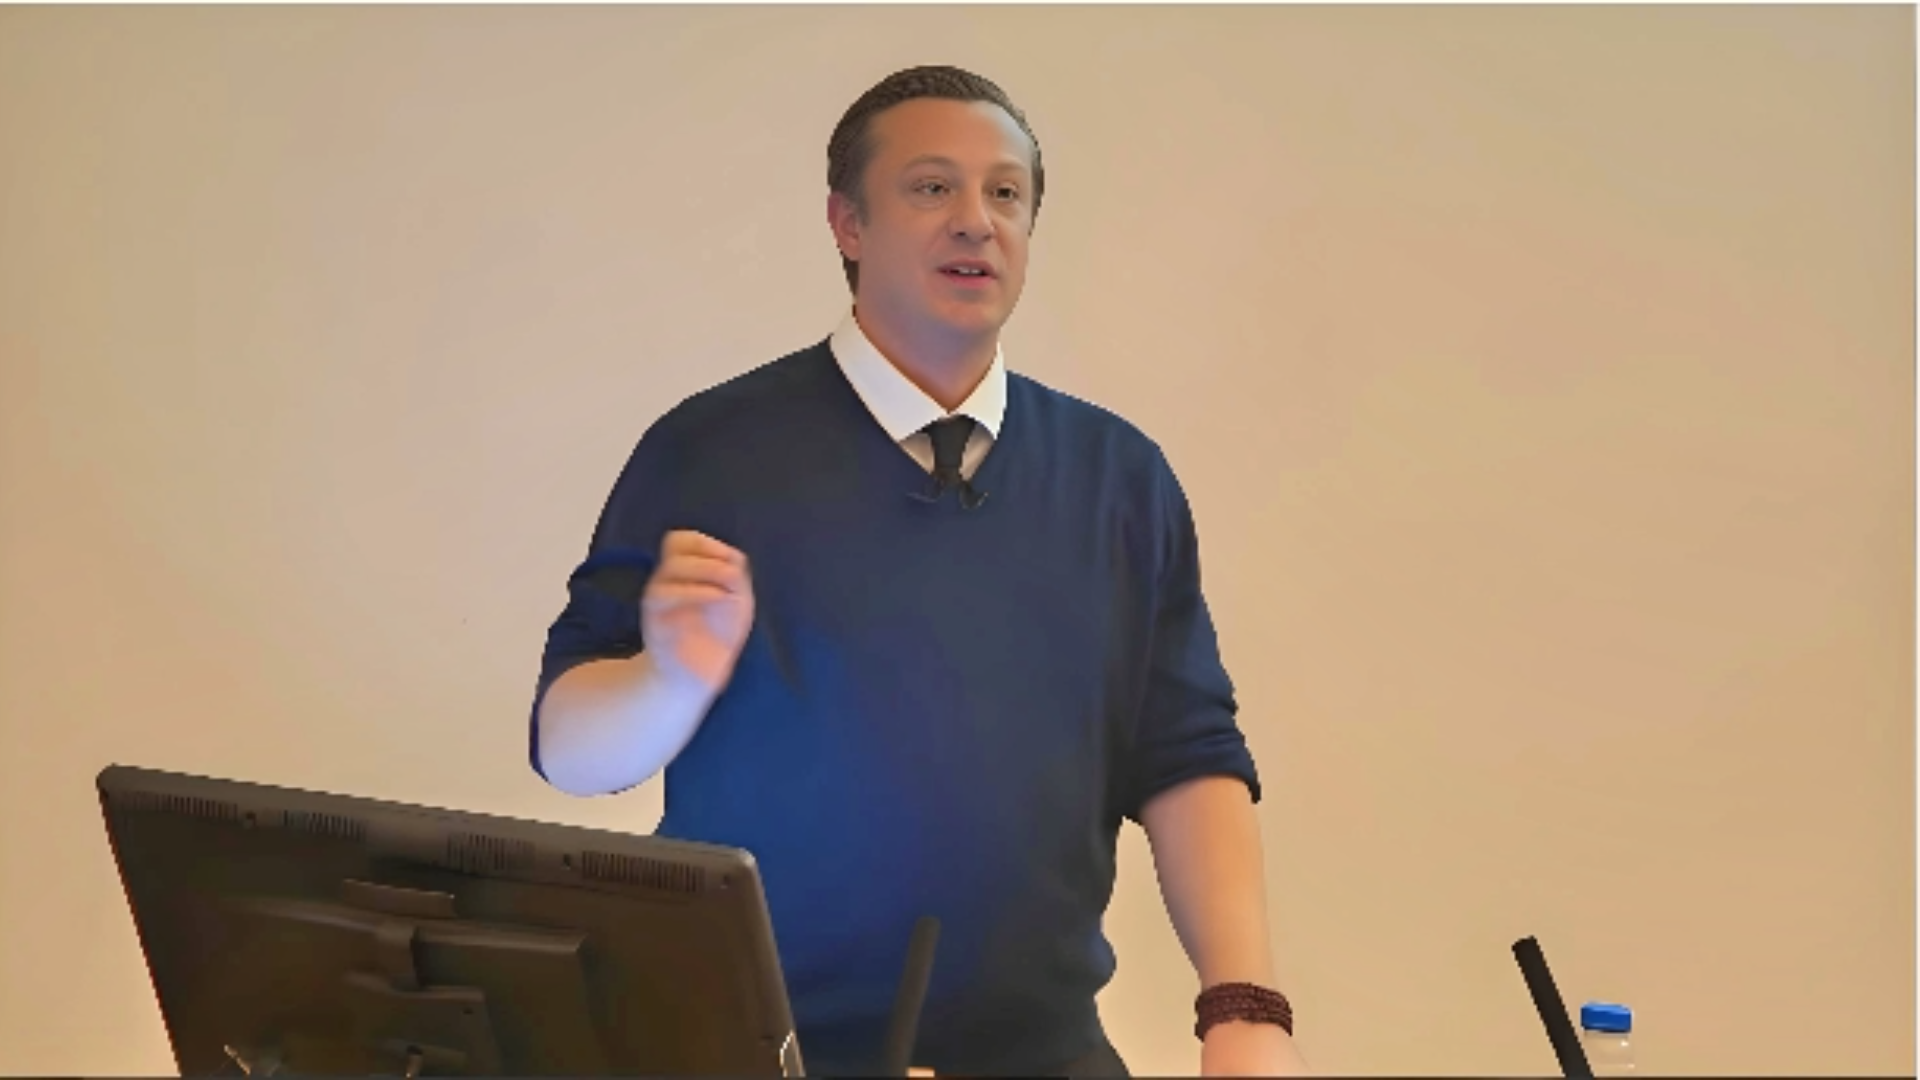 Anton Kreil delivering a lecture on trading in institute of traing depicting Anton Kreil Net Worth 2023, wearing blue shirt, standing near podium